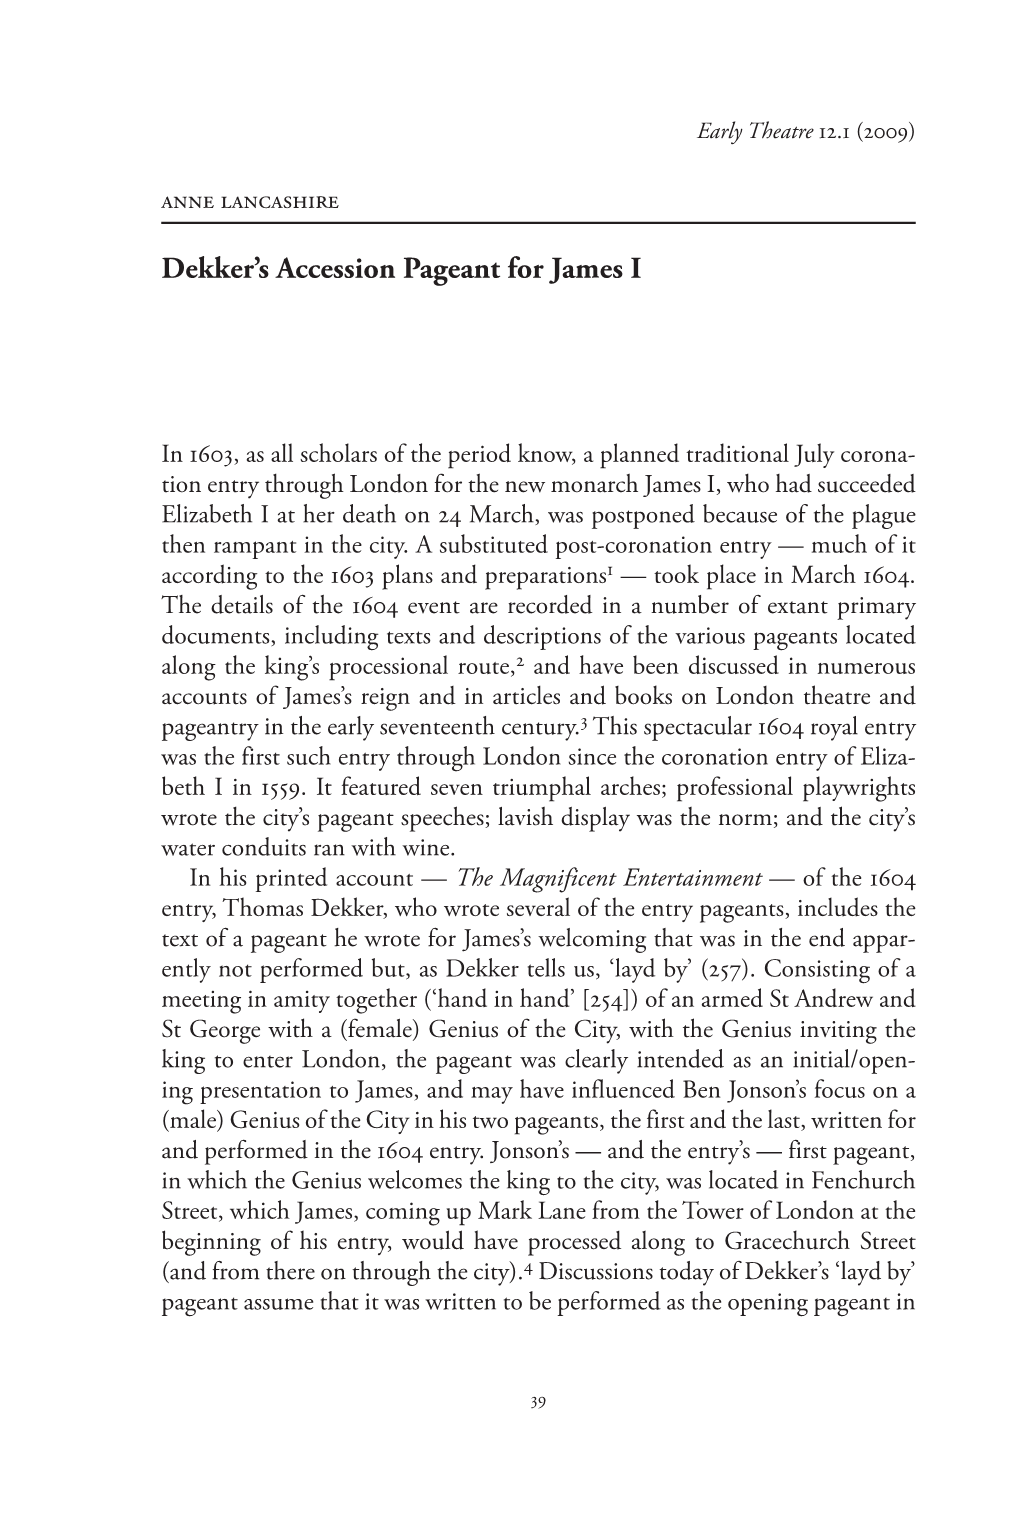 Dekker's Accession Pageant for James I